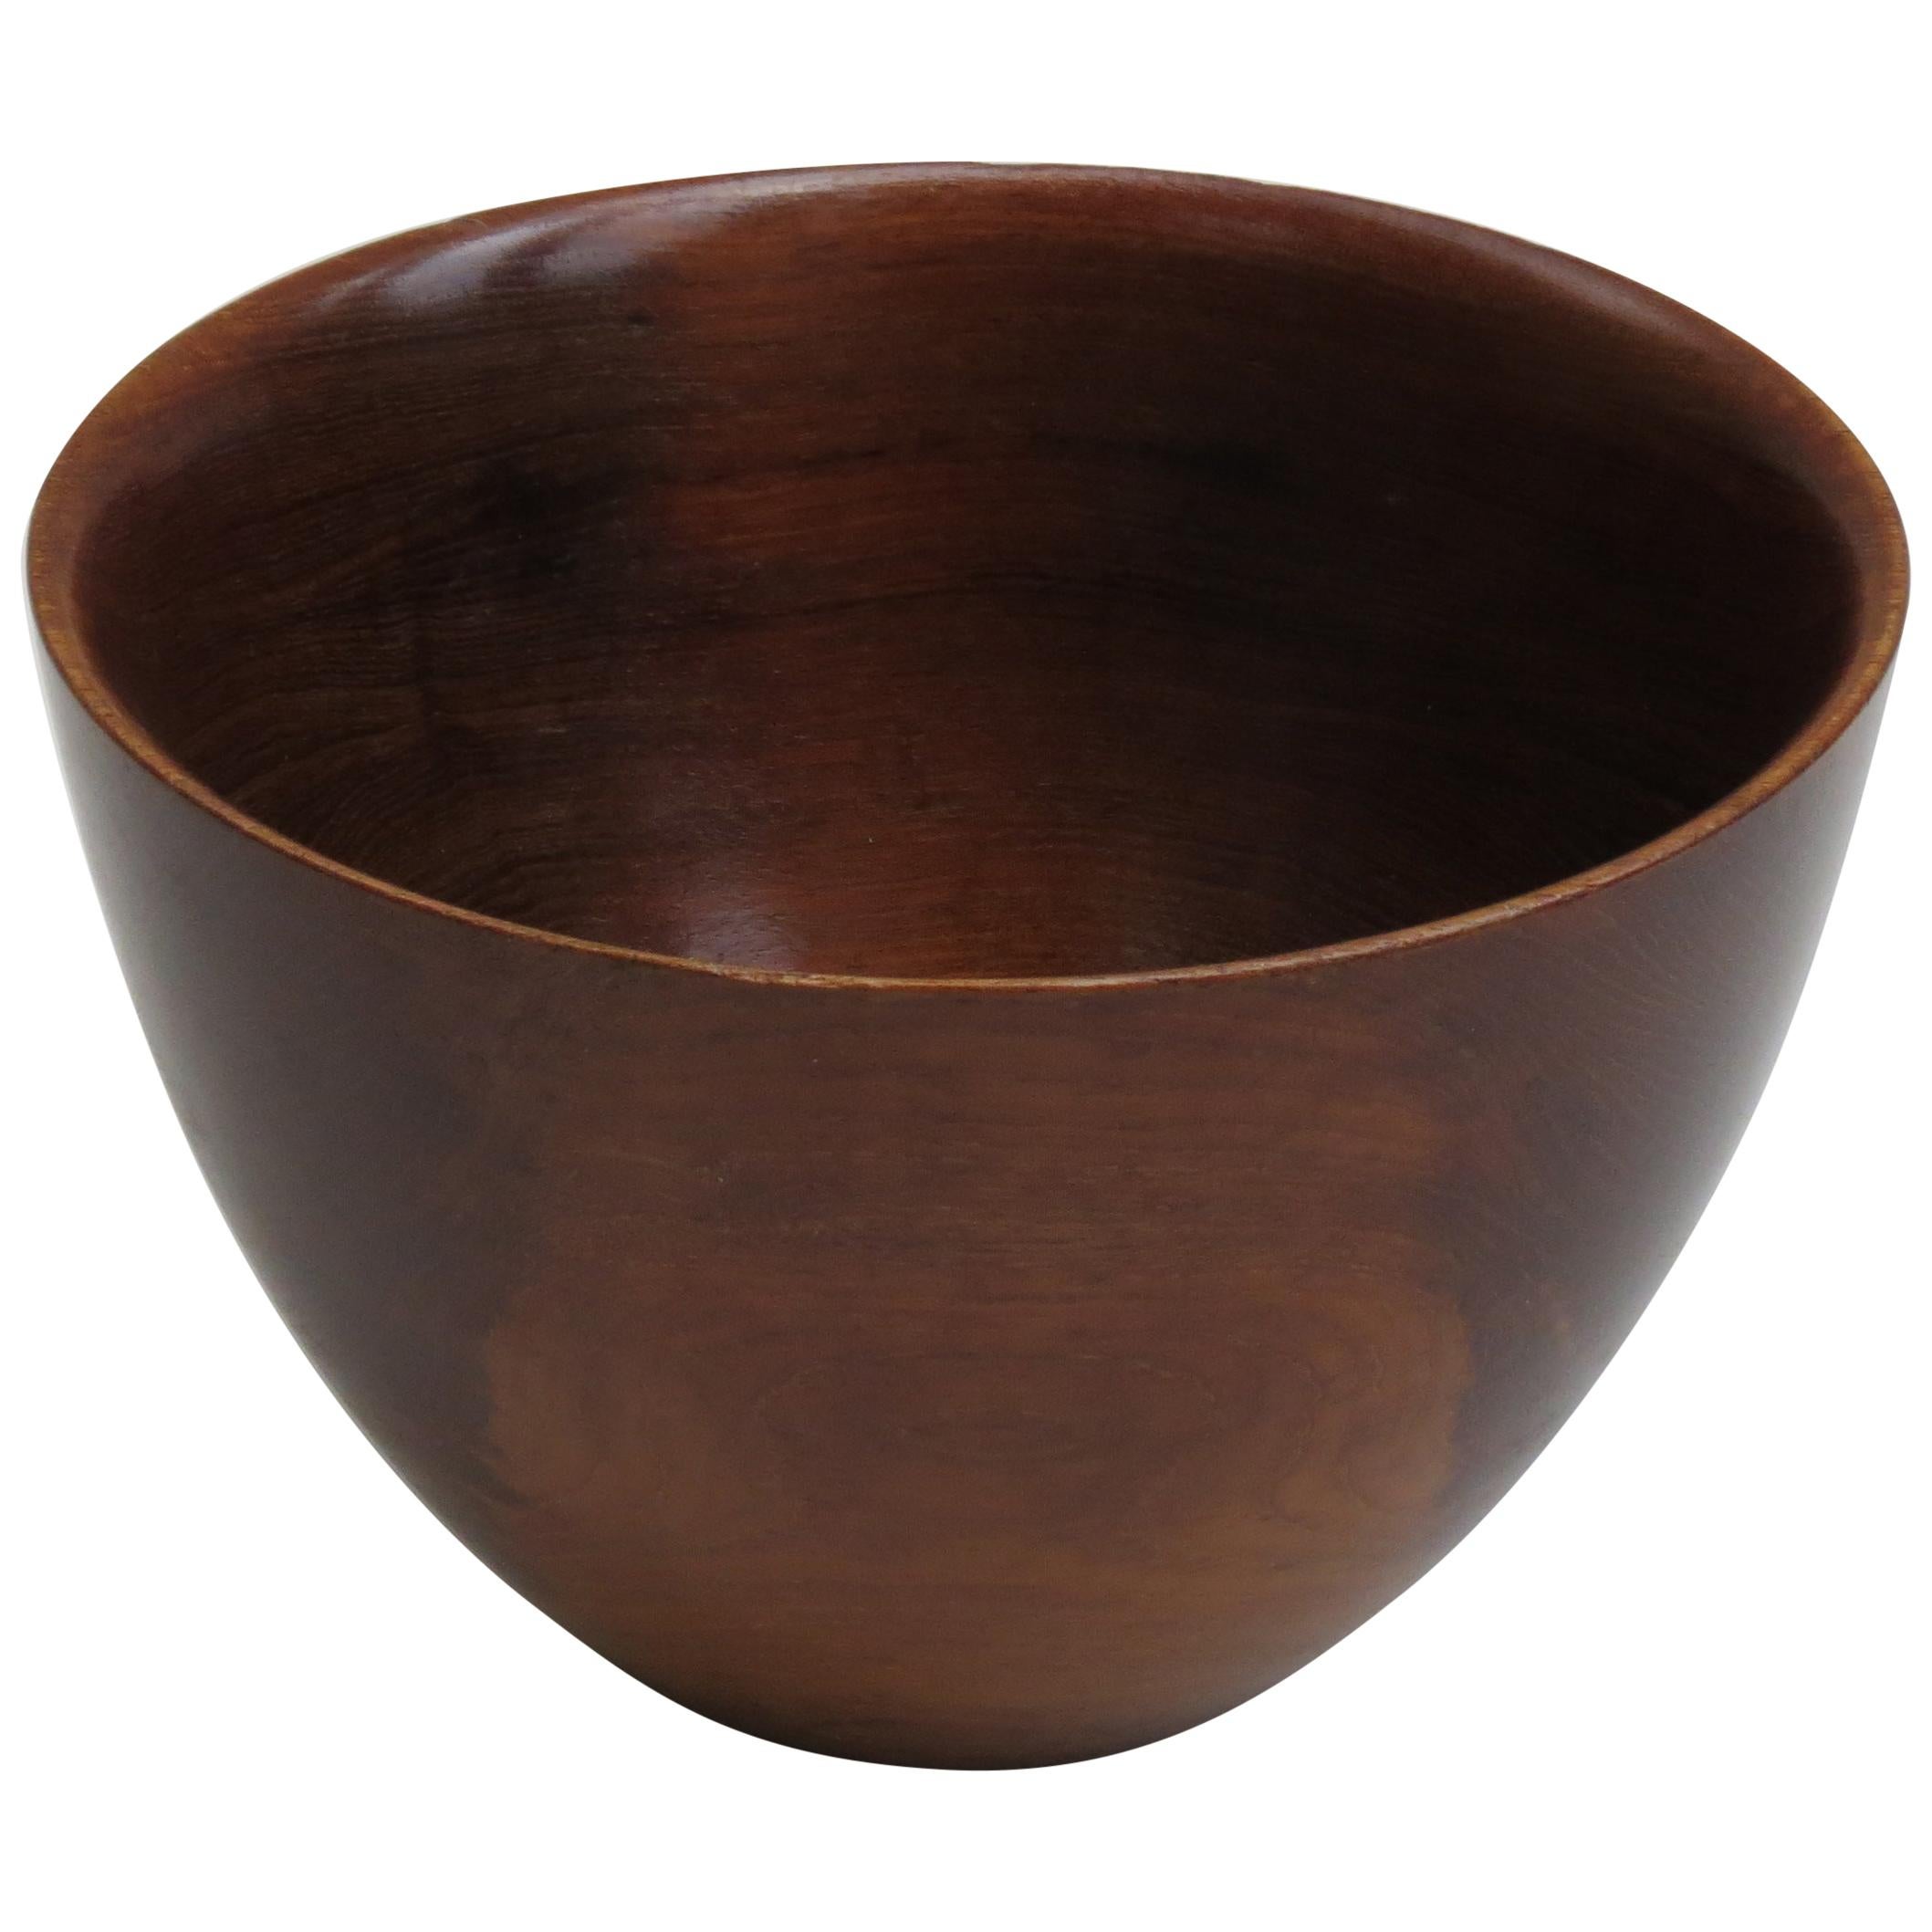 Large hand produced teak bowl by Galatix, England.

Dates from the 1970s. Wonderful shape and color.

ST1217.